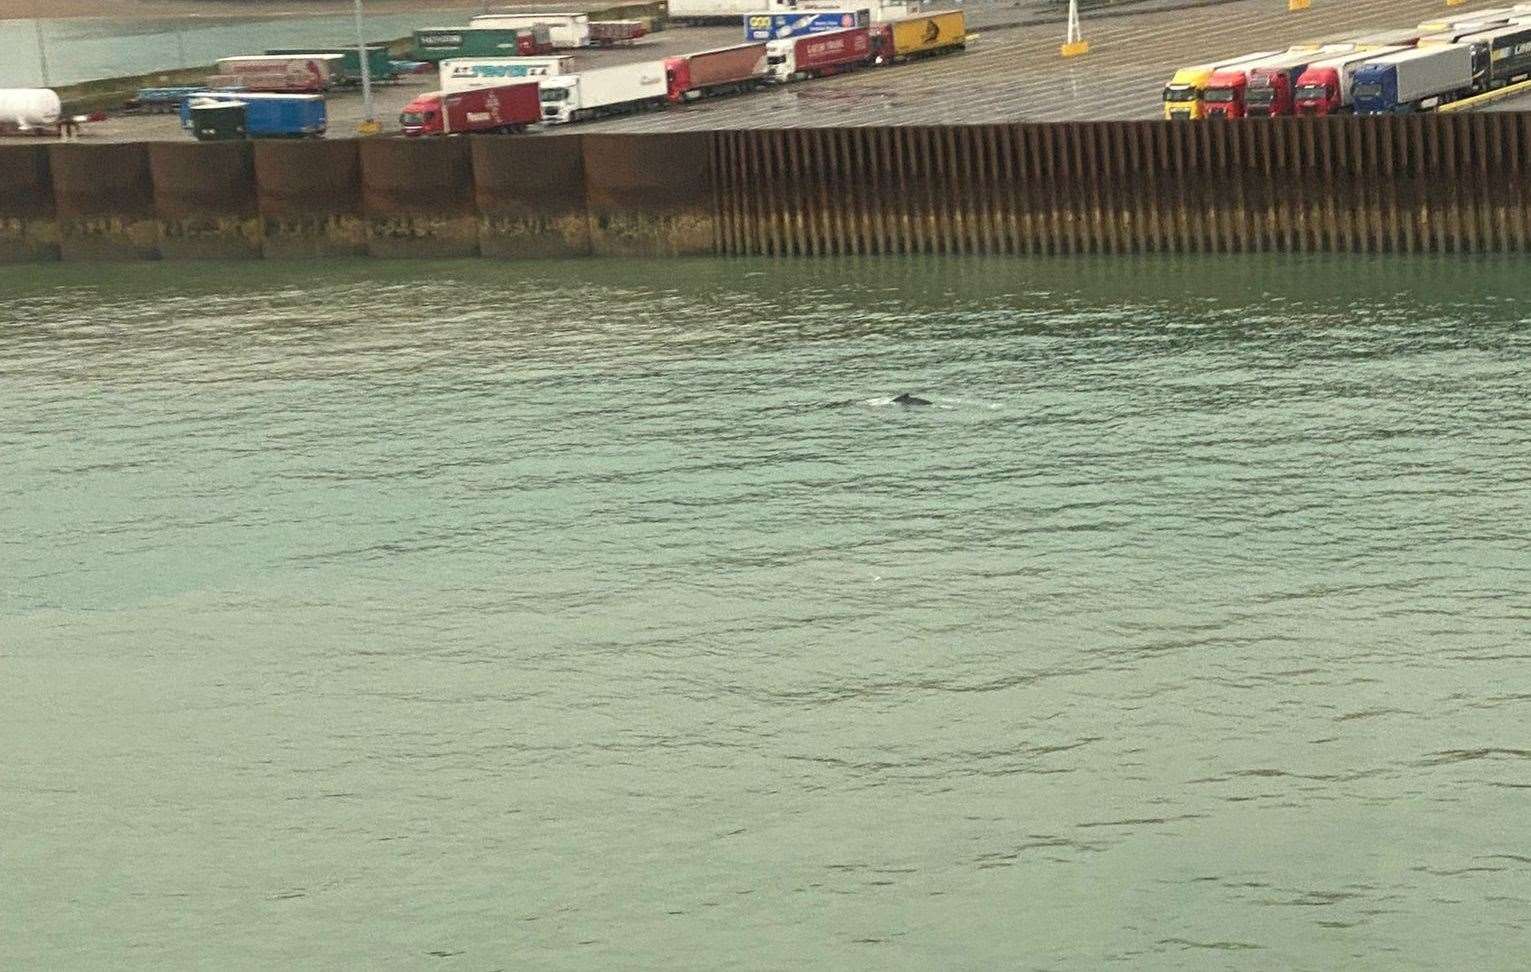 A whale has been spotted in the sea in Dover